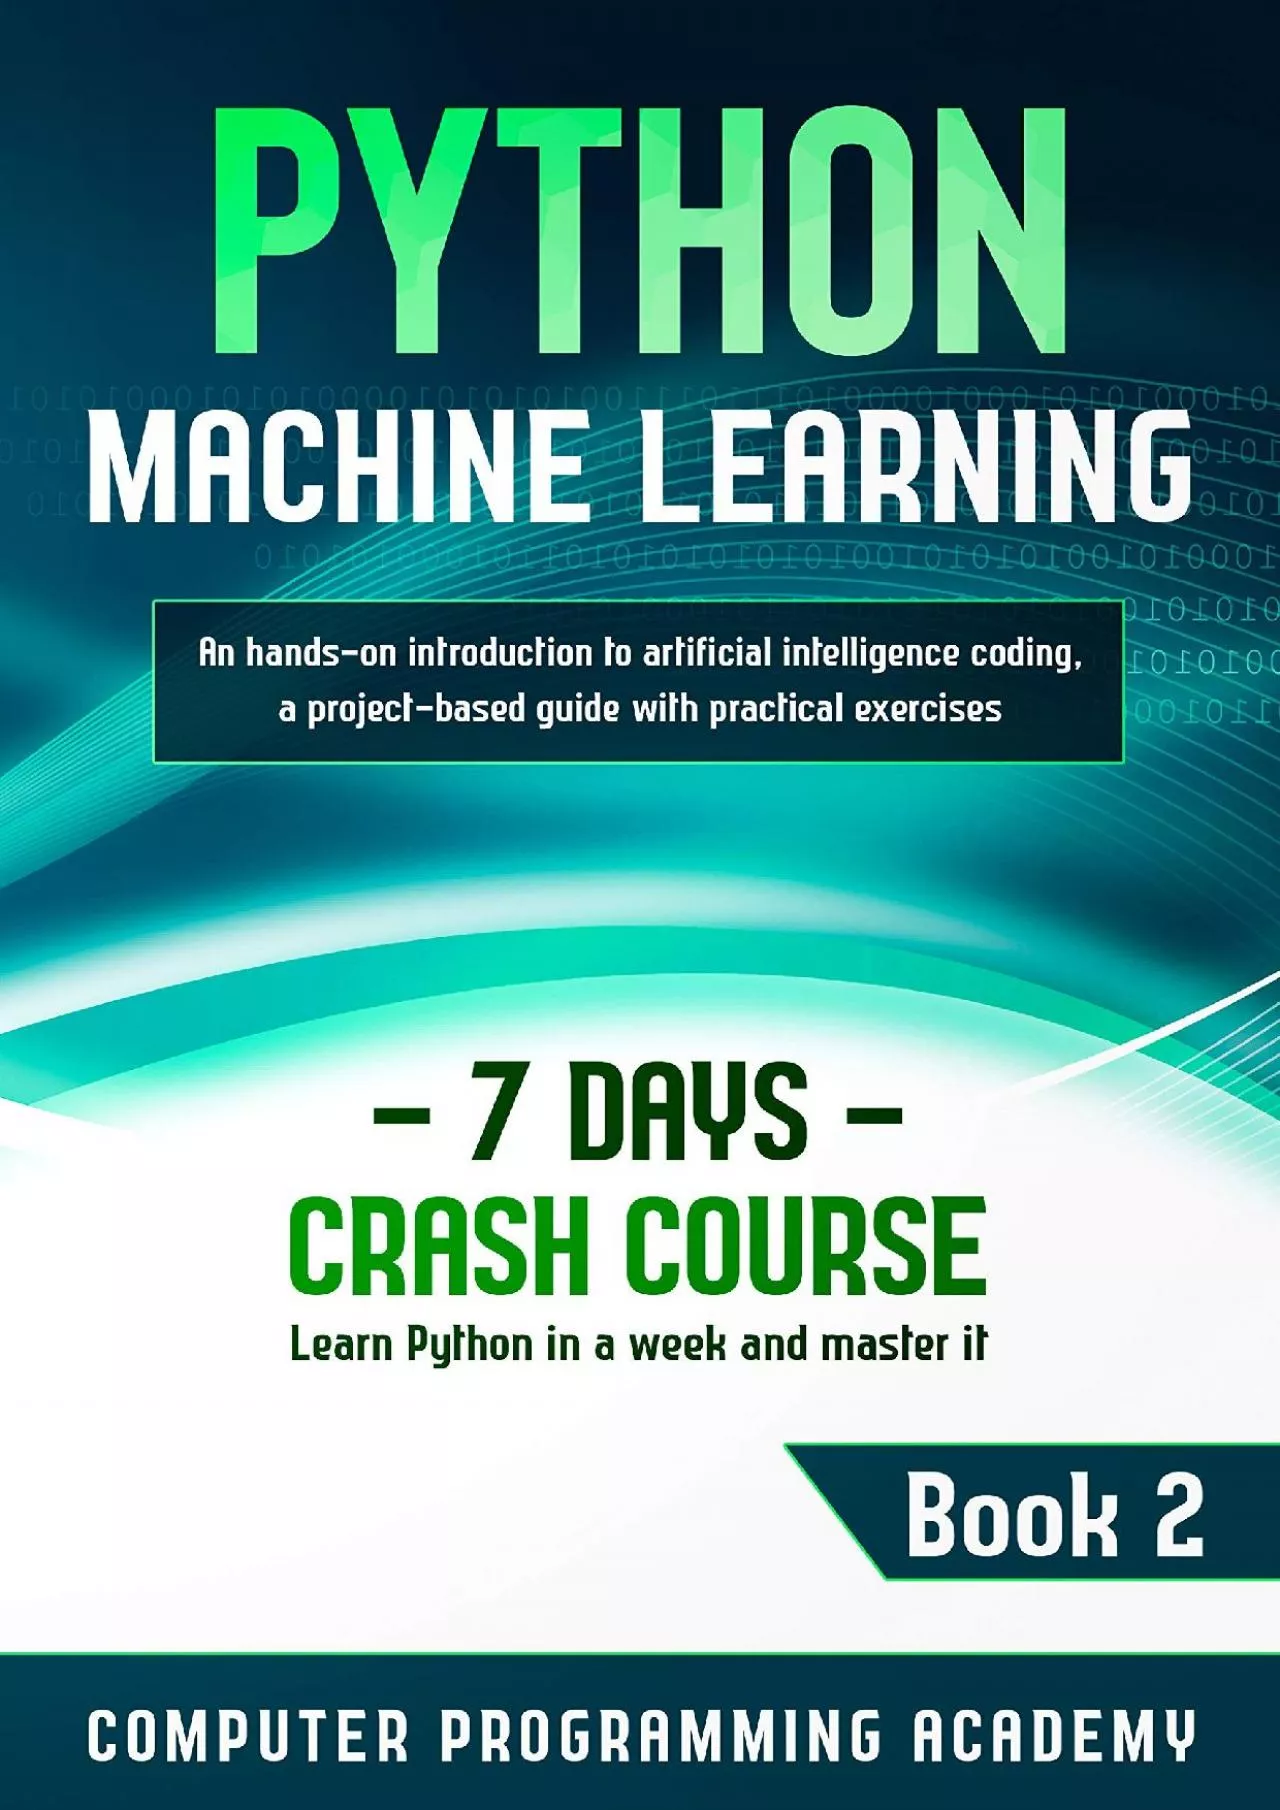 (BOOK)-Python Machine Learning: Learn Python in a Week and Master It. An Hands-On Introduction